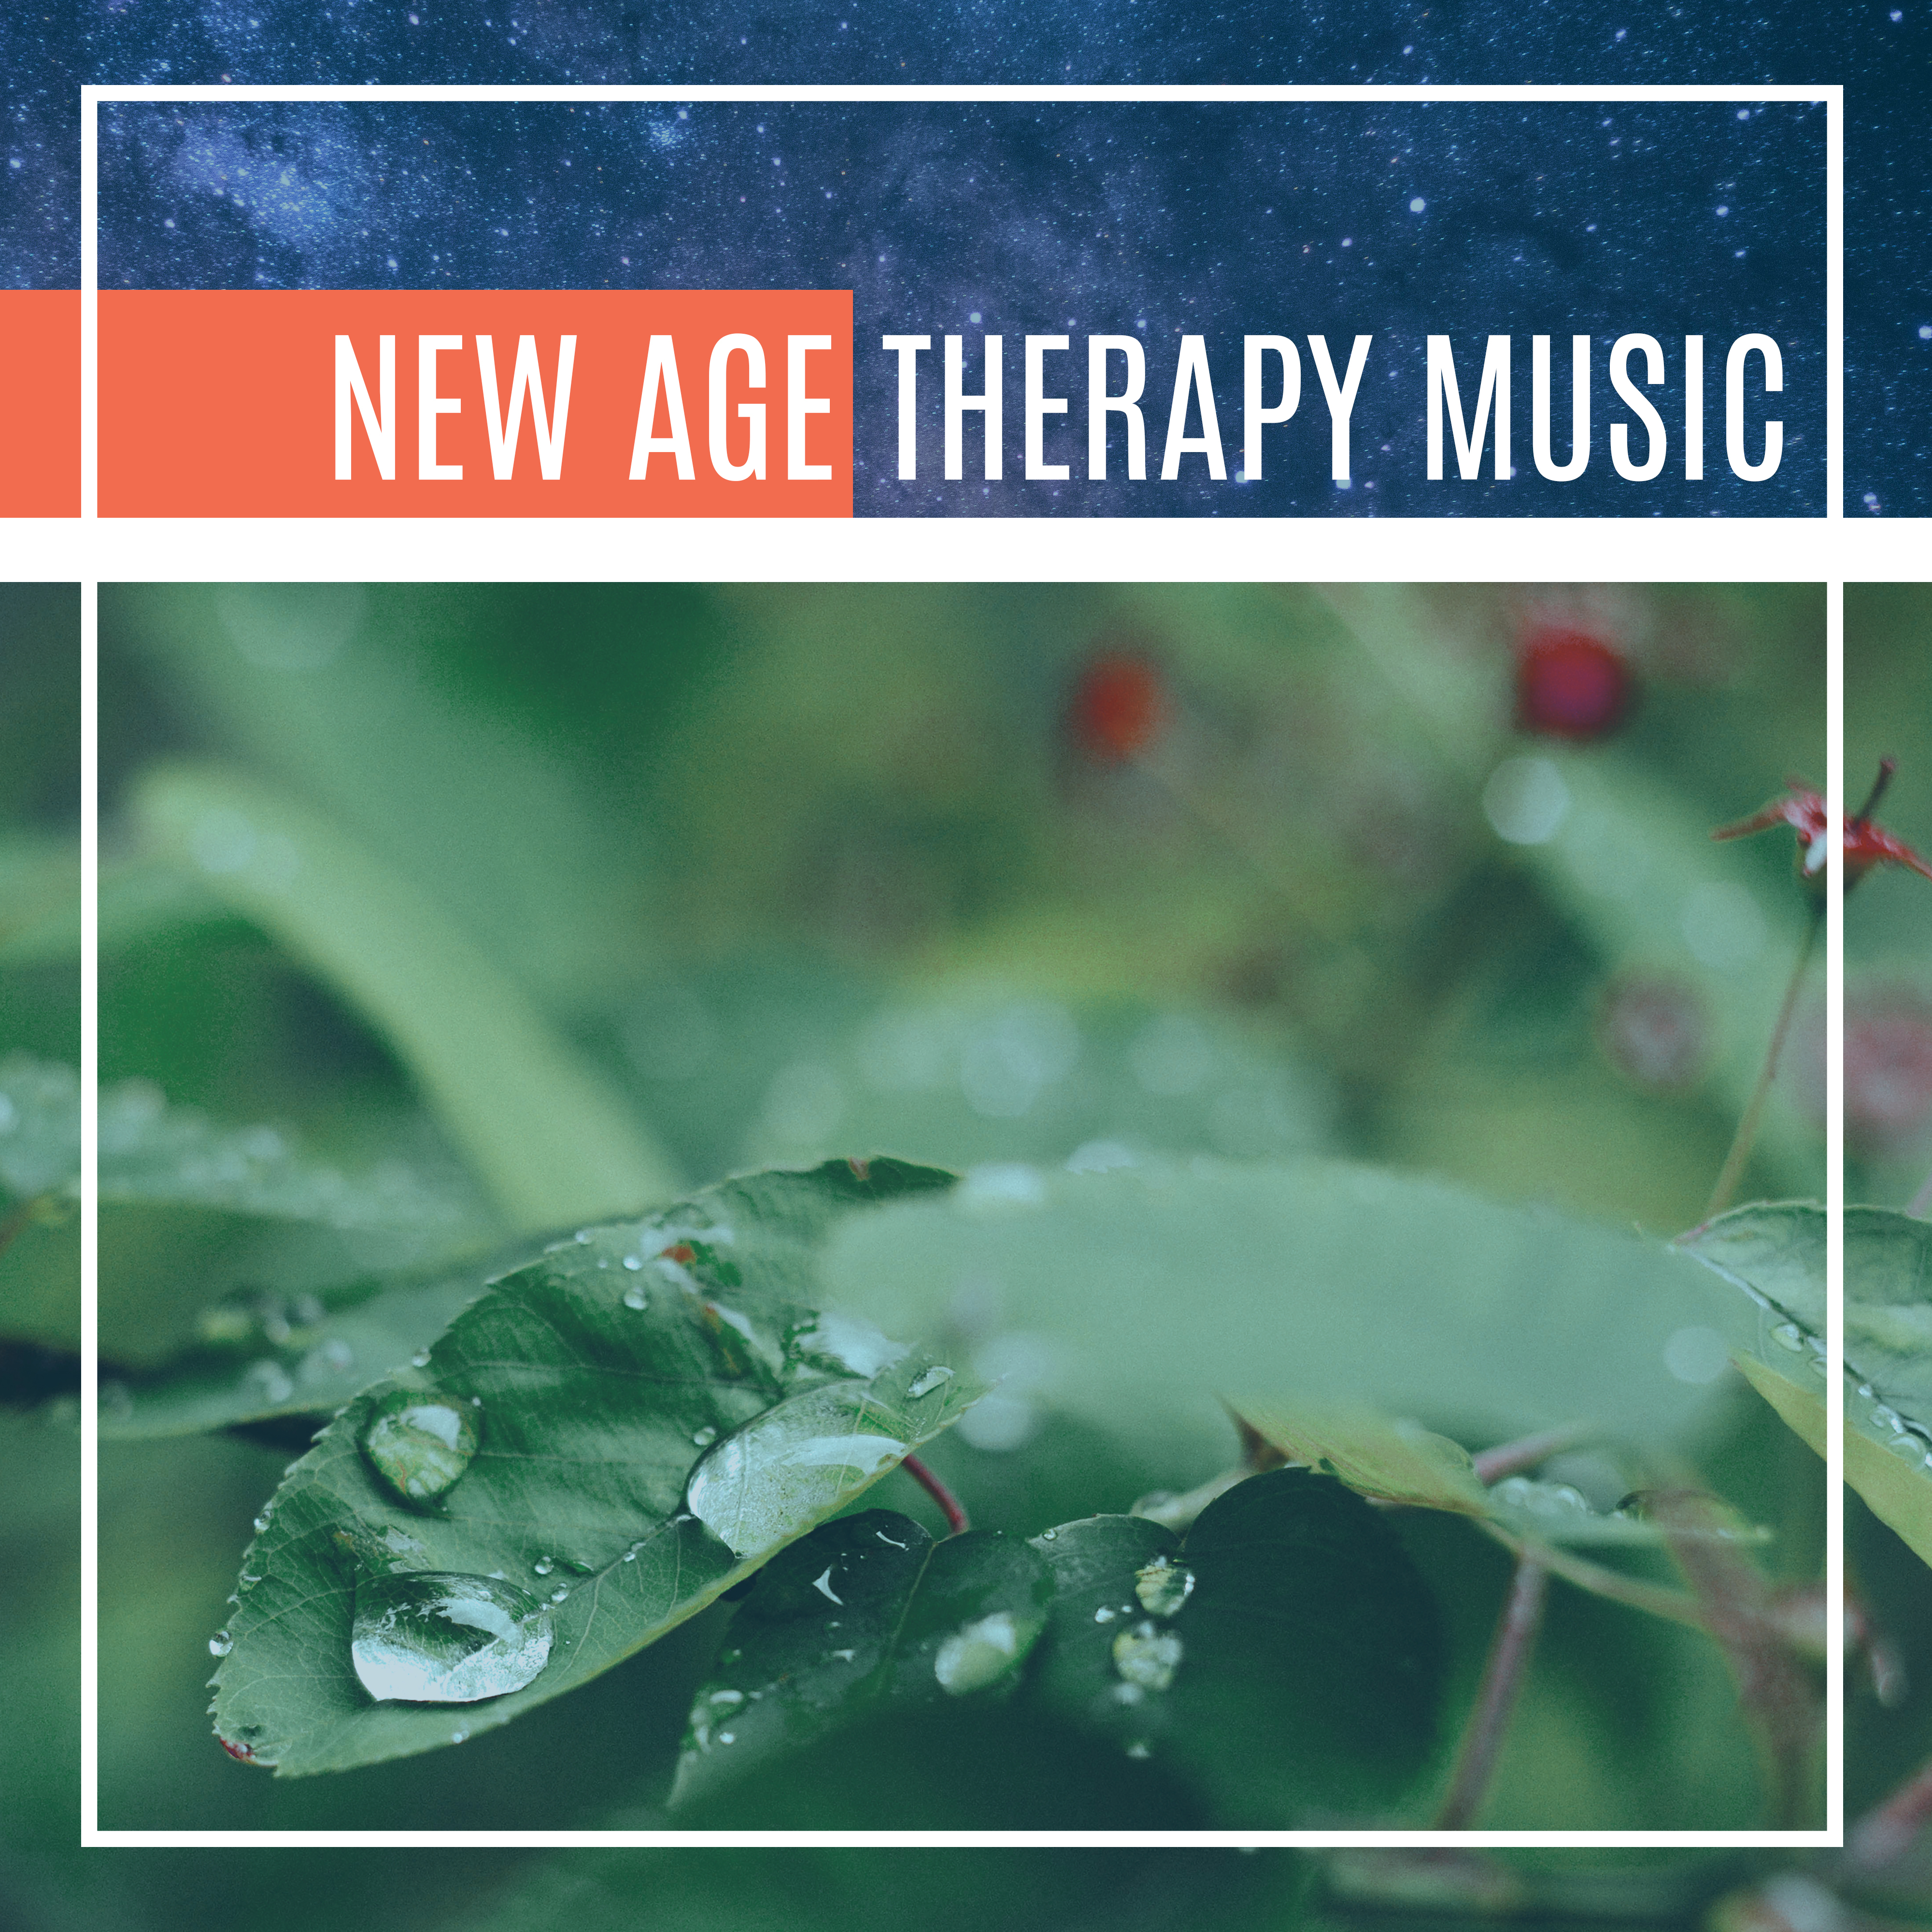 New Age Therapy Music  Calming Sounds of Nature, Helpful for Relaxation, Feel Better, Relaxing Music